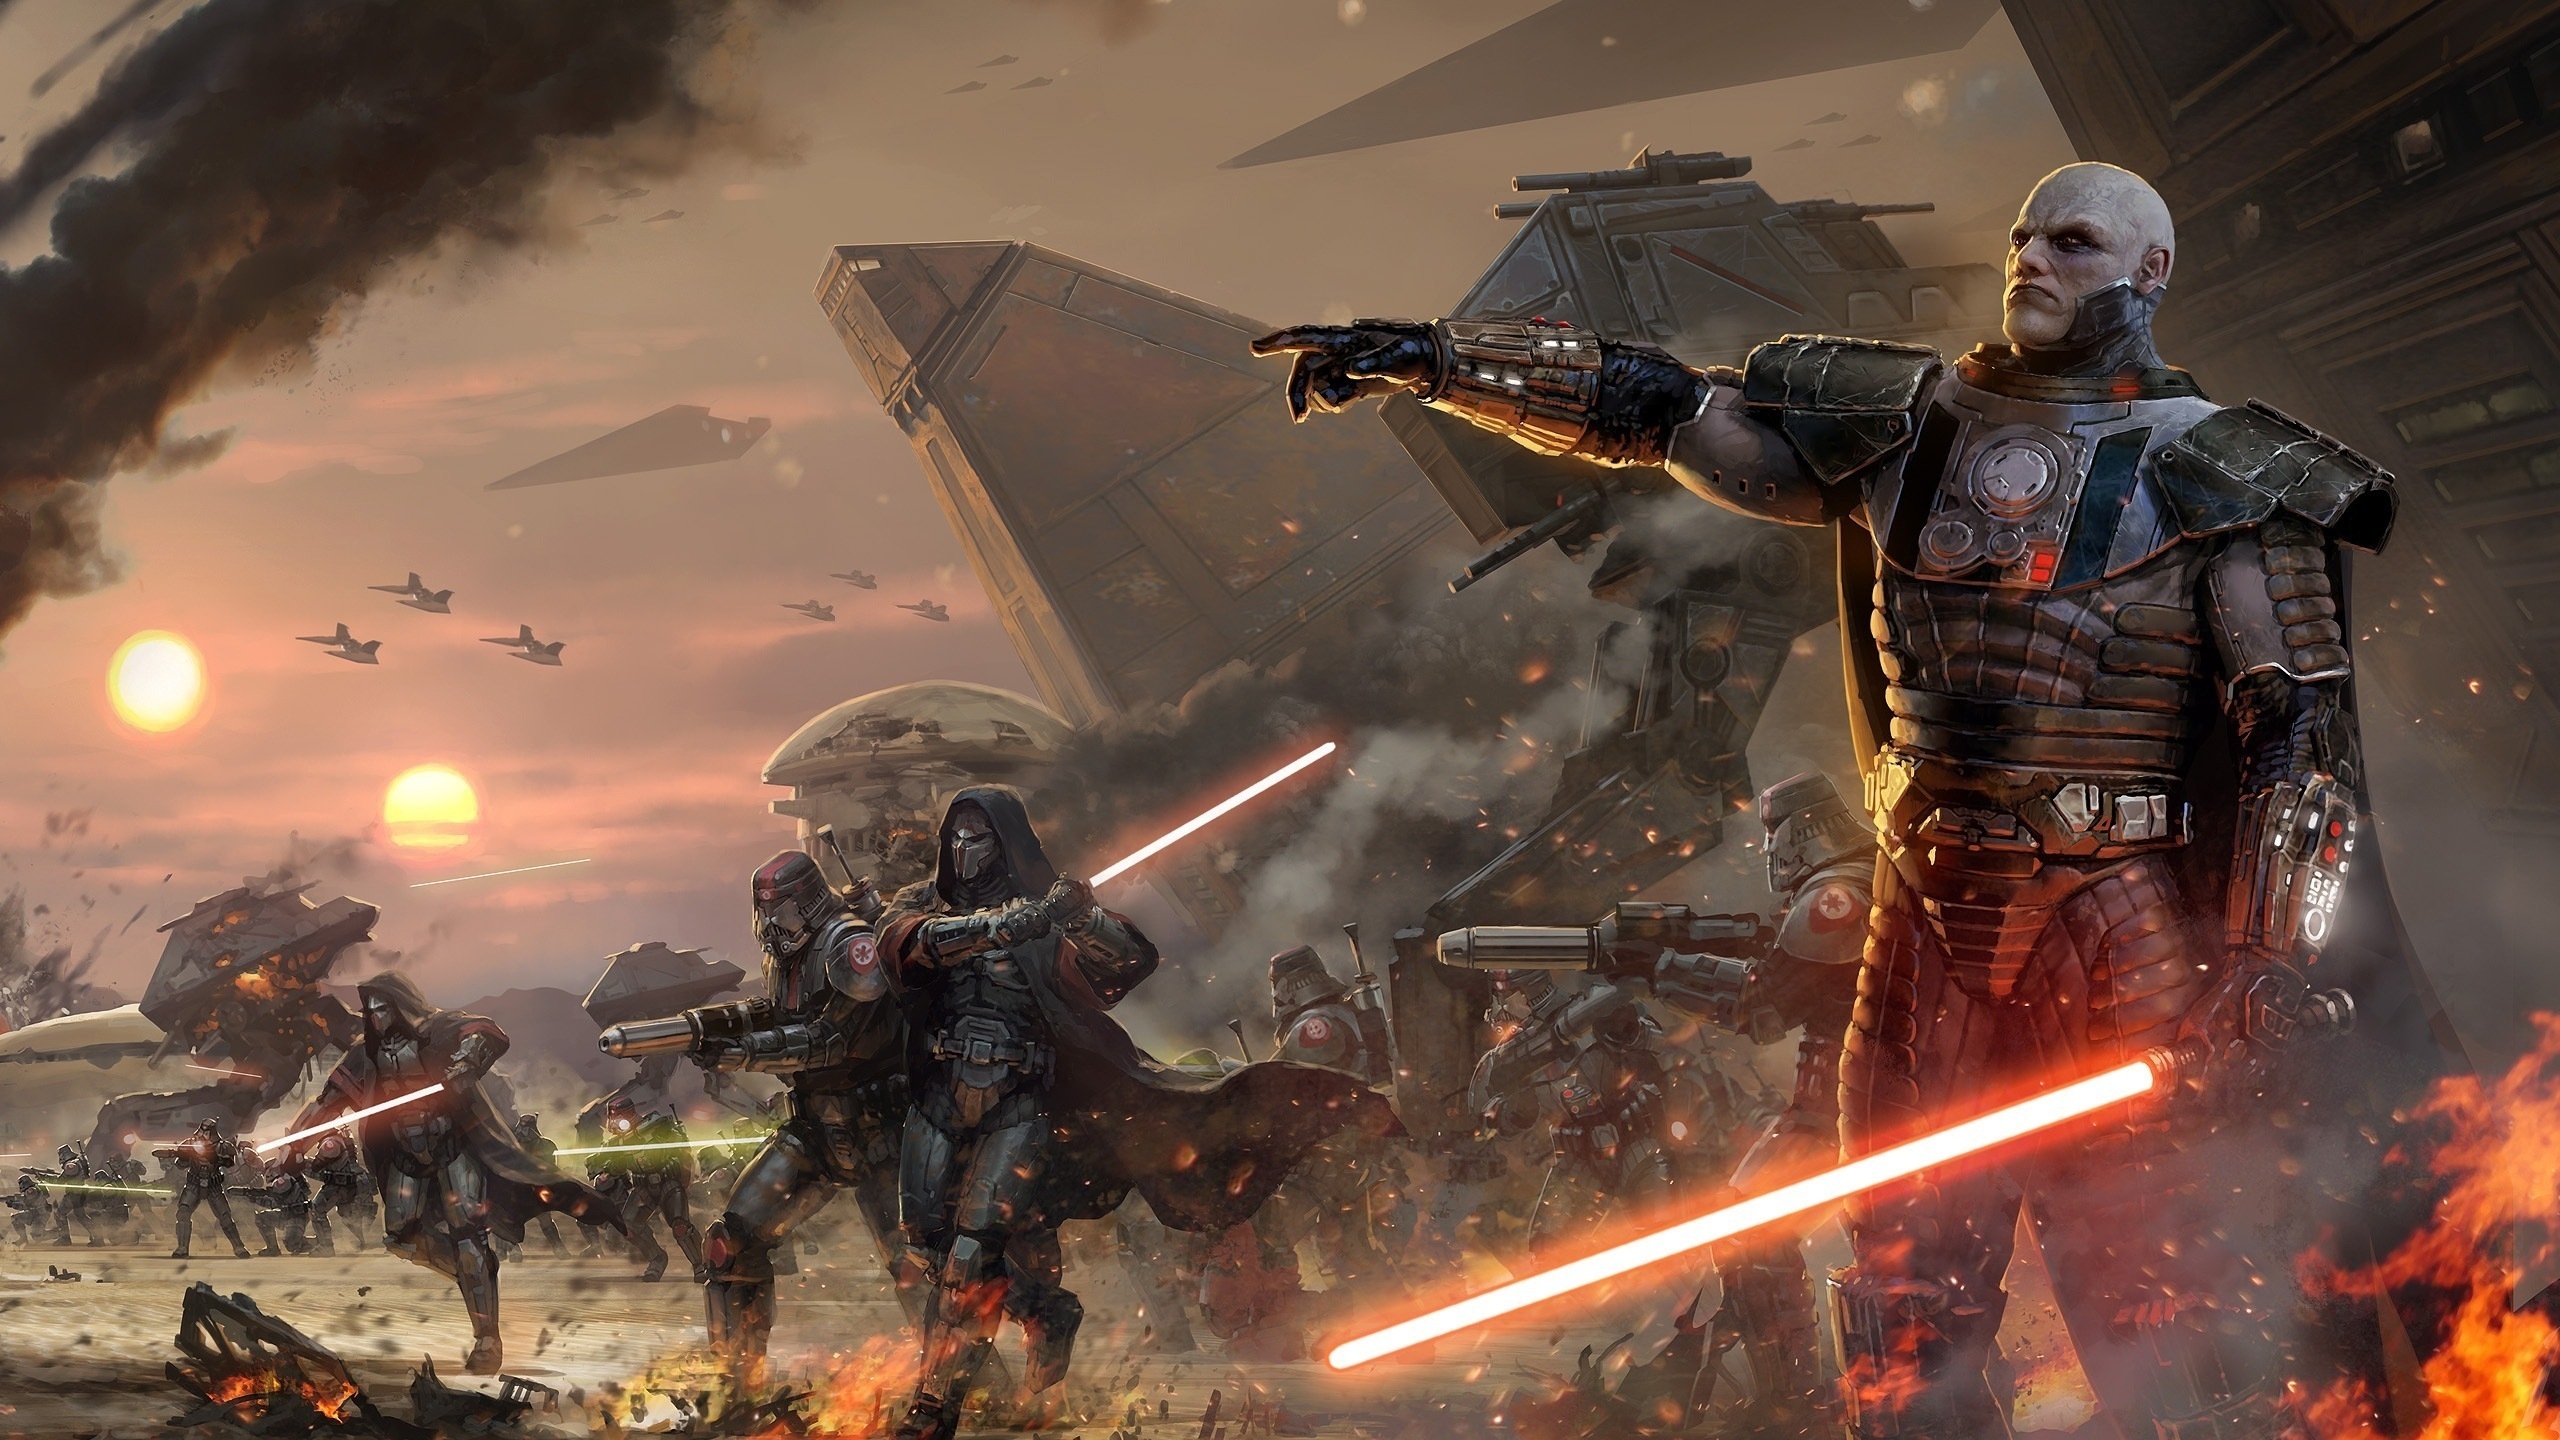 Star Wars Old Republic for 2560x1440 HDTV resolution